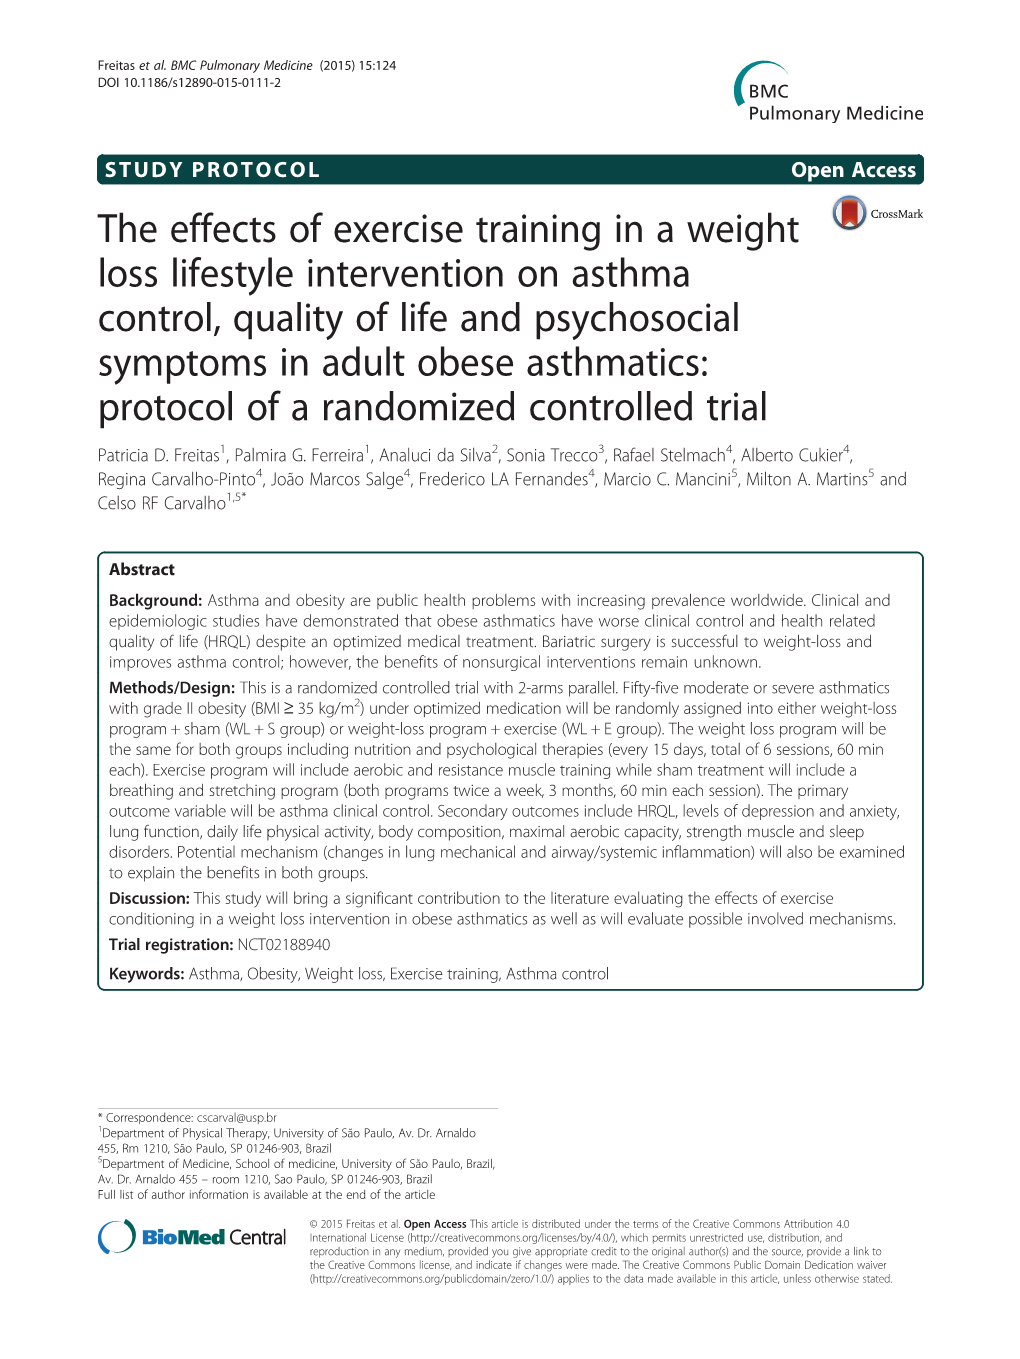 The Effects of Exercise Training in a Weight Loss Lifestyle Intervention On